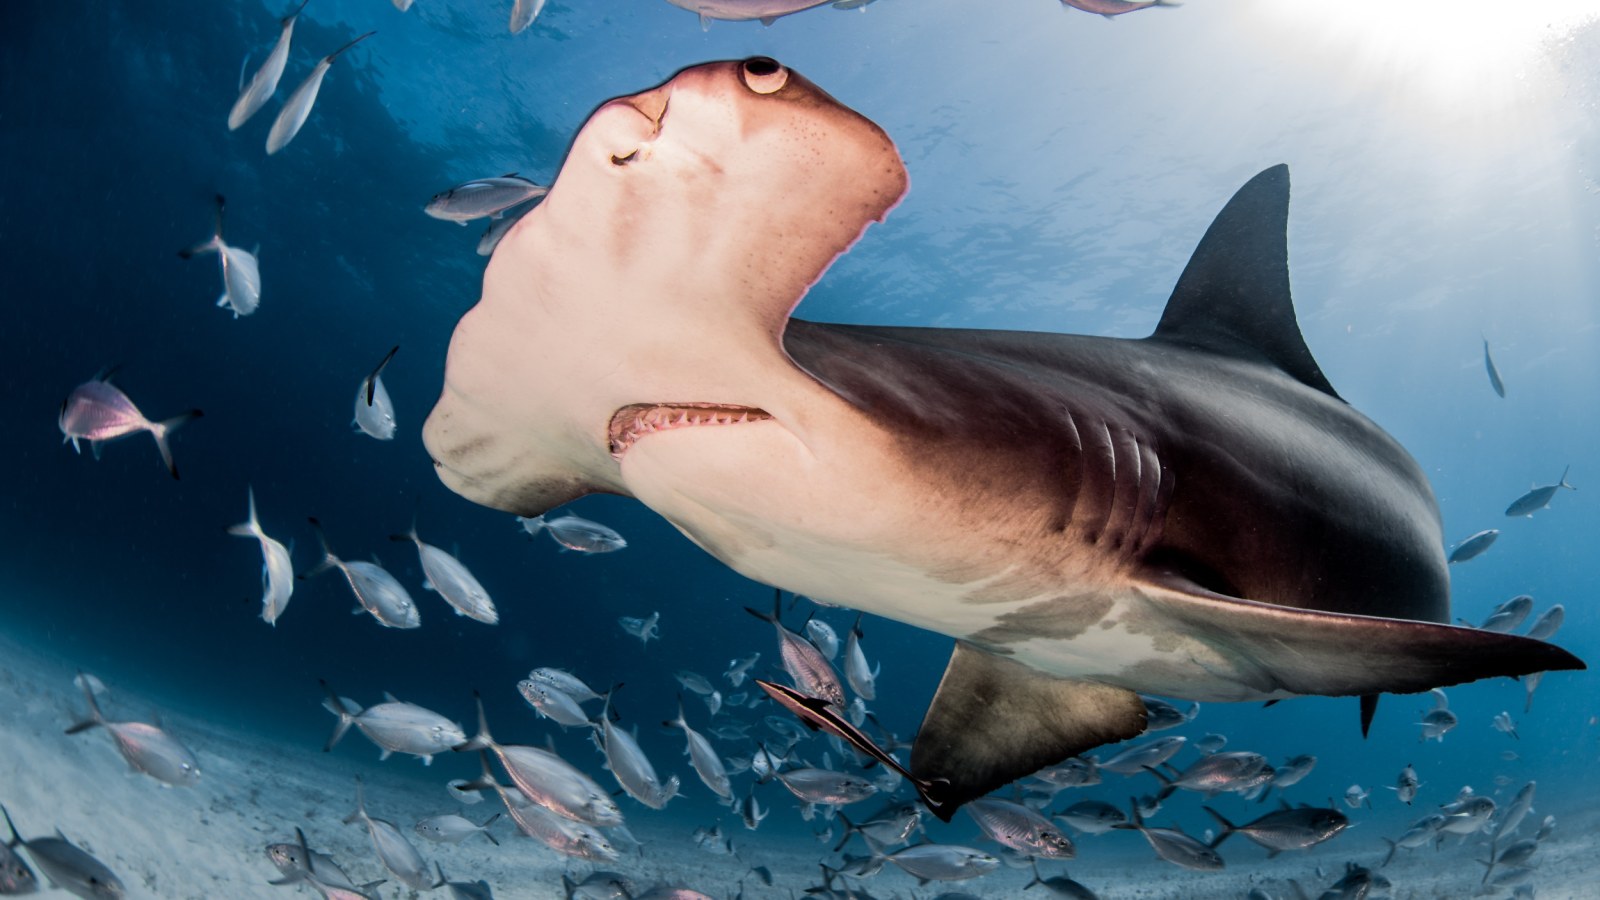 Mystery Solved After Hammerhead Shark and 40 Pups Found Dead